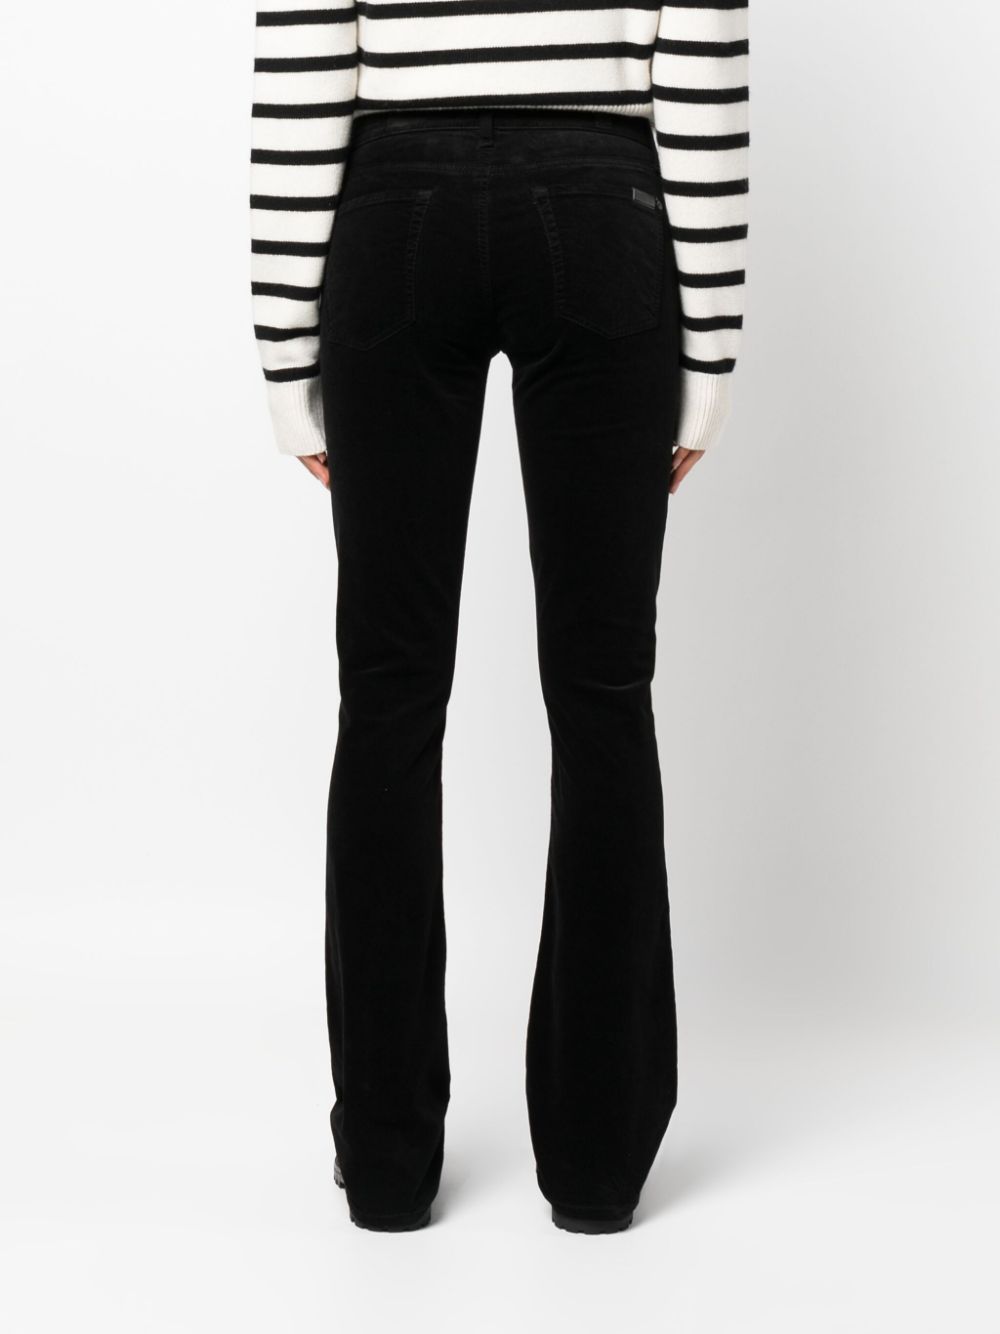 7 For All Mankind 7 FOR ALL MANKIND- Velvet Bootcut Jeans